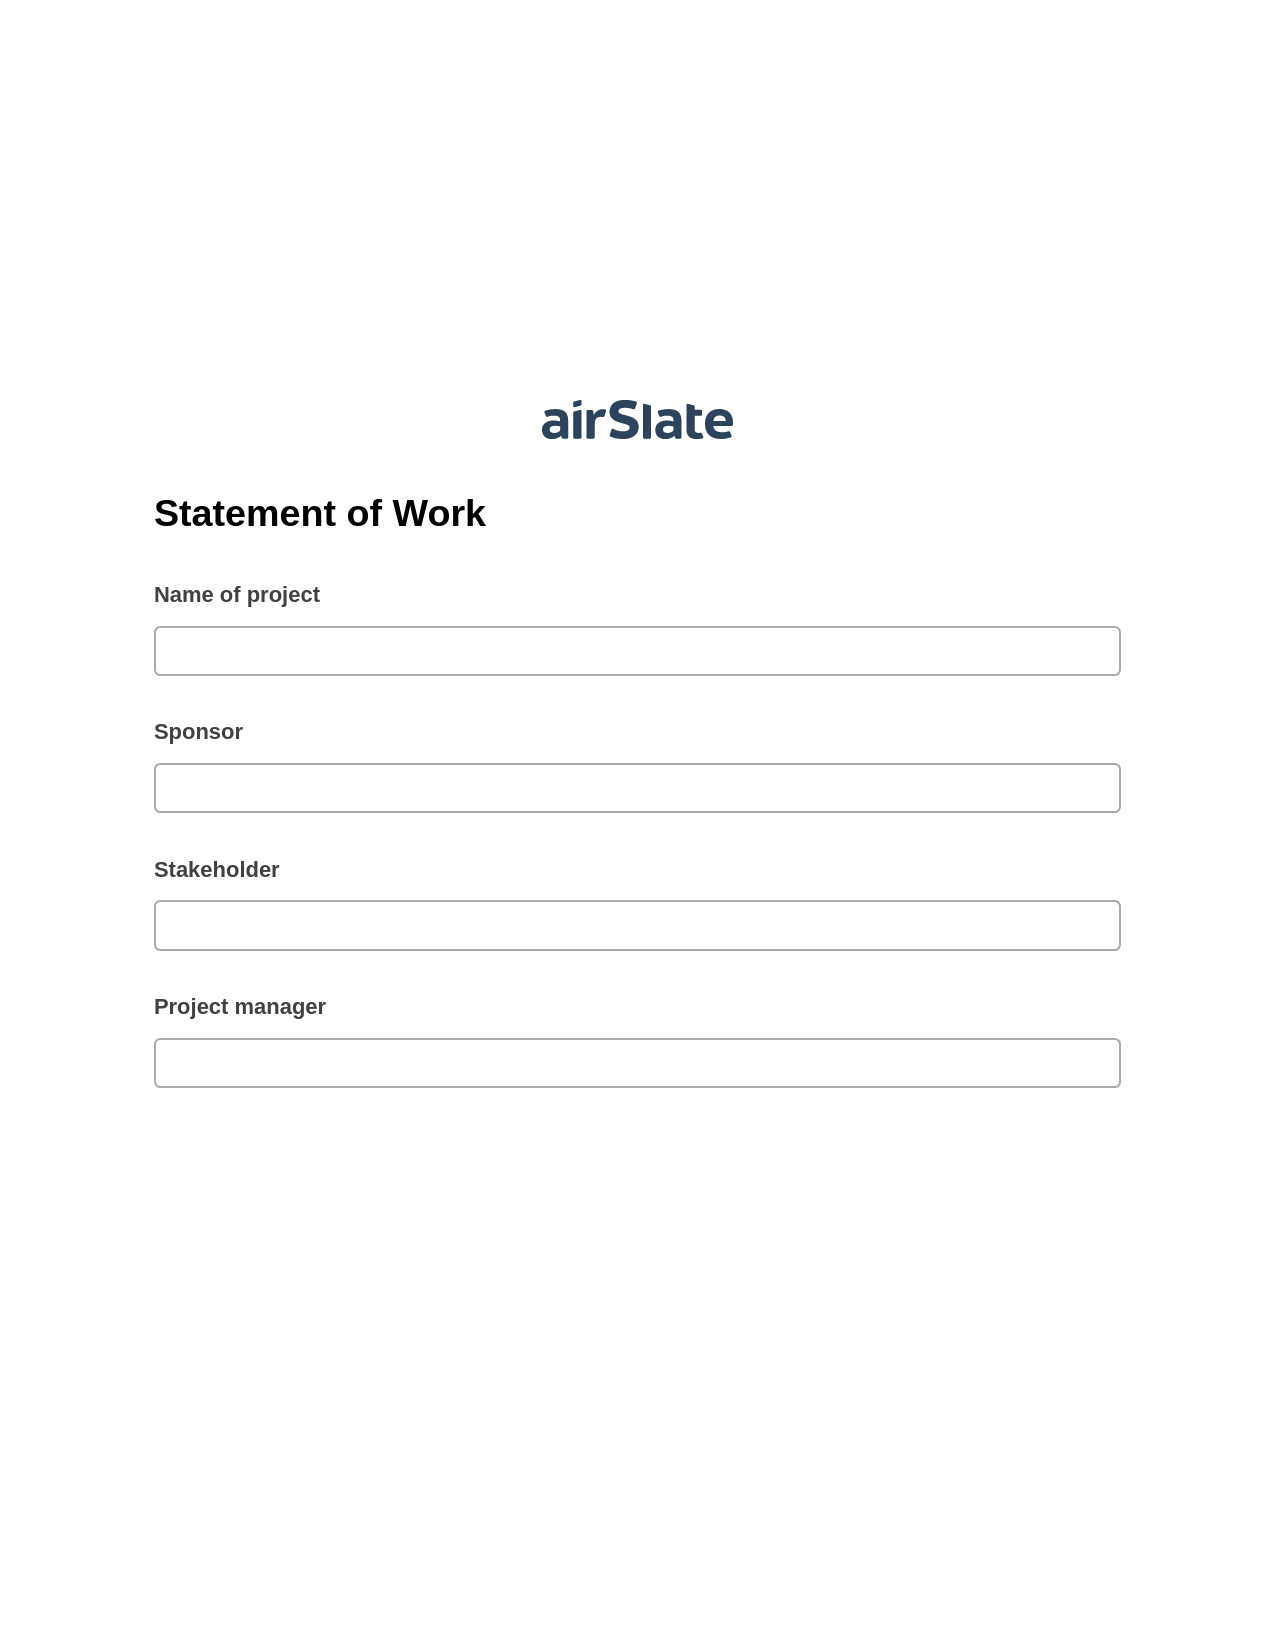 Statement of Work Pre-fill from CSV File Bot, Google Cloud Print Bot, Export to Excel 365 Bot